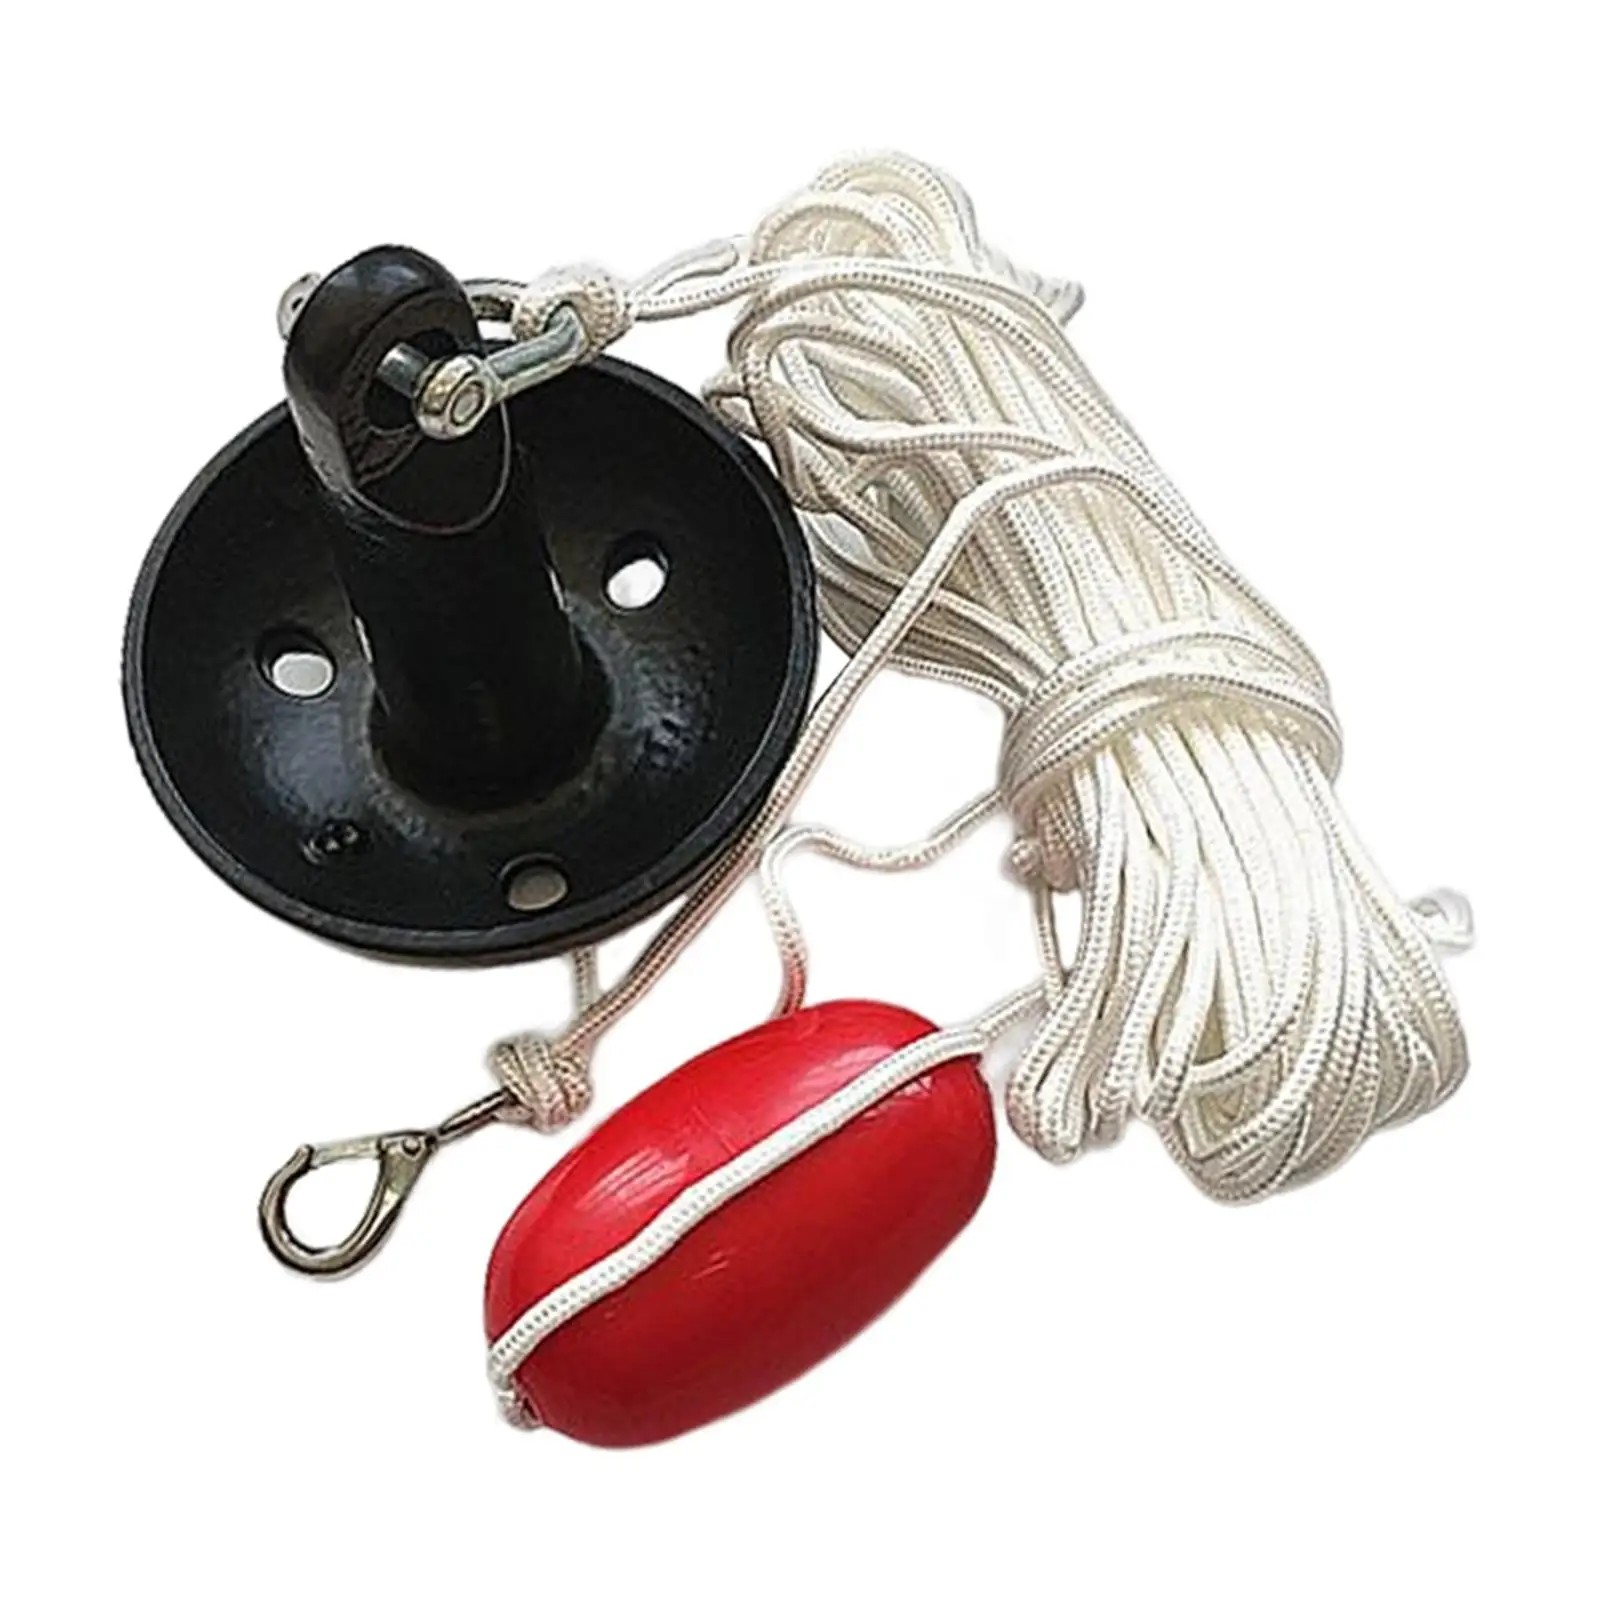 Complete Mushroom Anchor Kit 5 lb PE Coated Finish Fit for Paddle Board